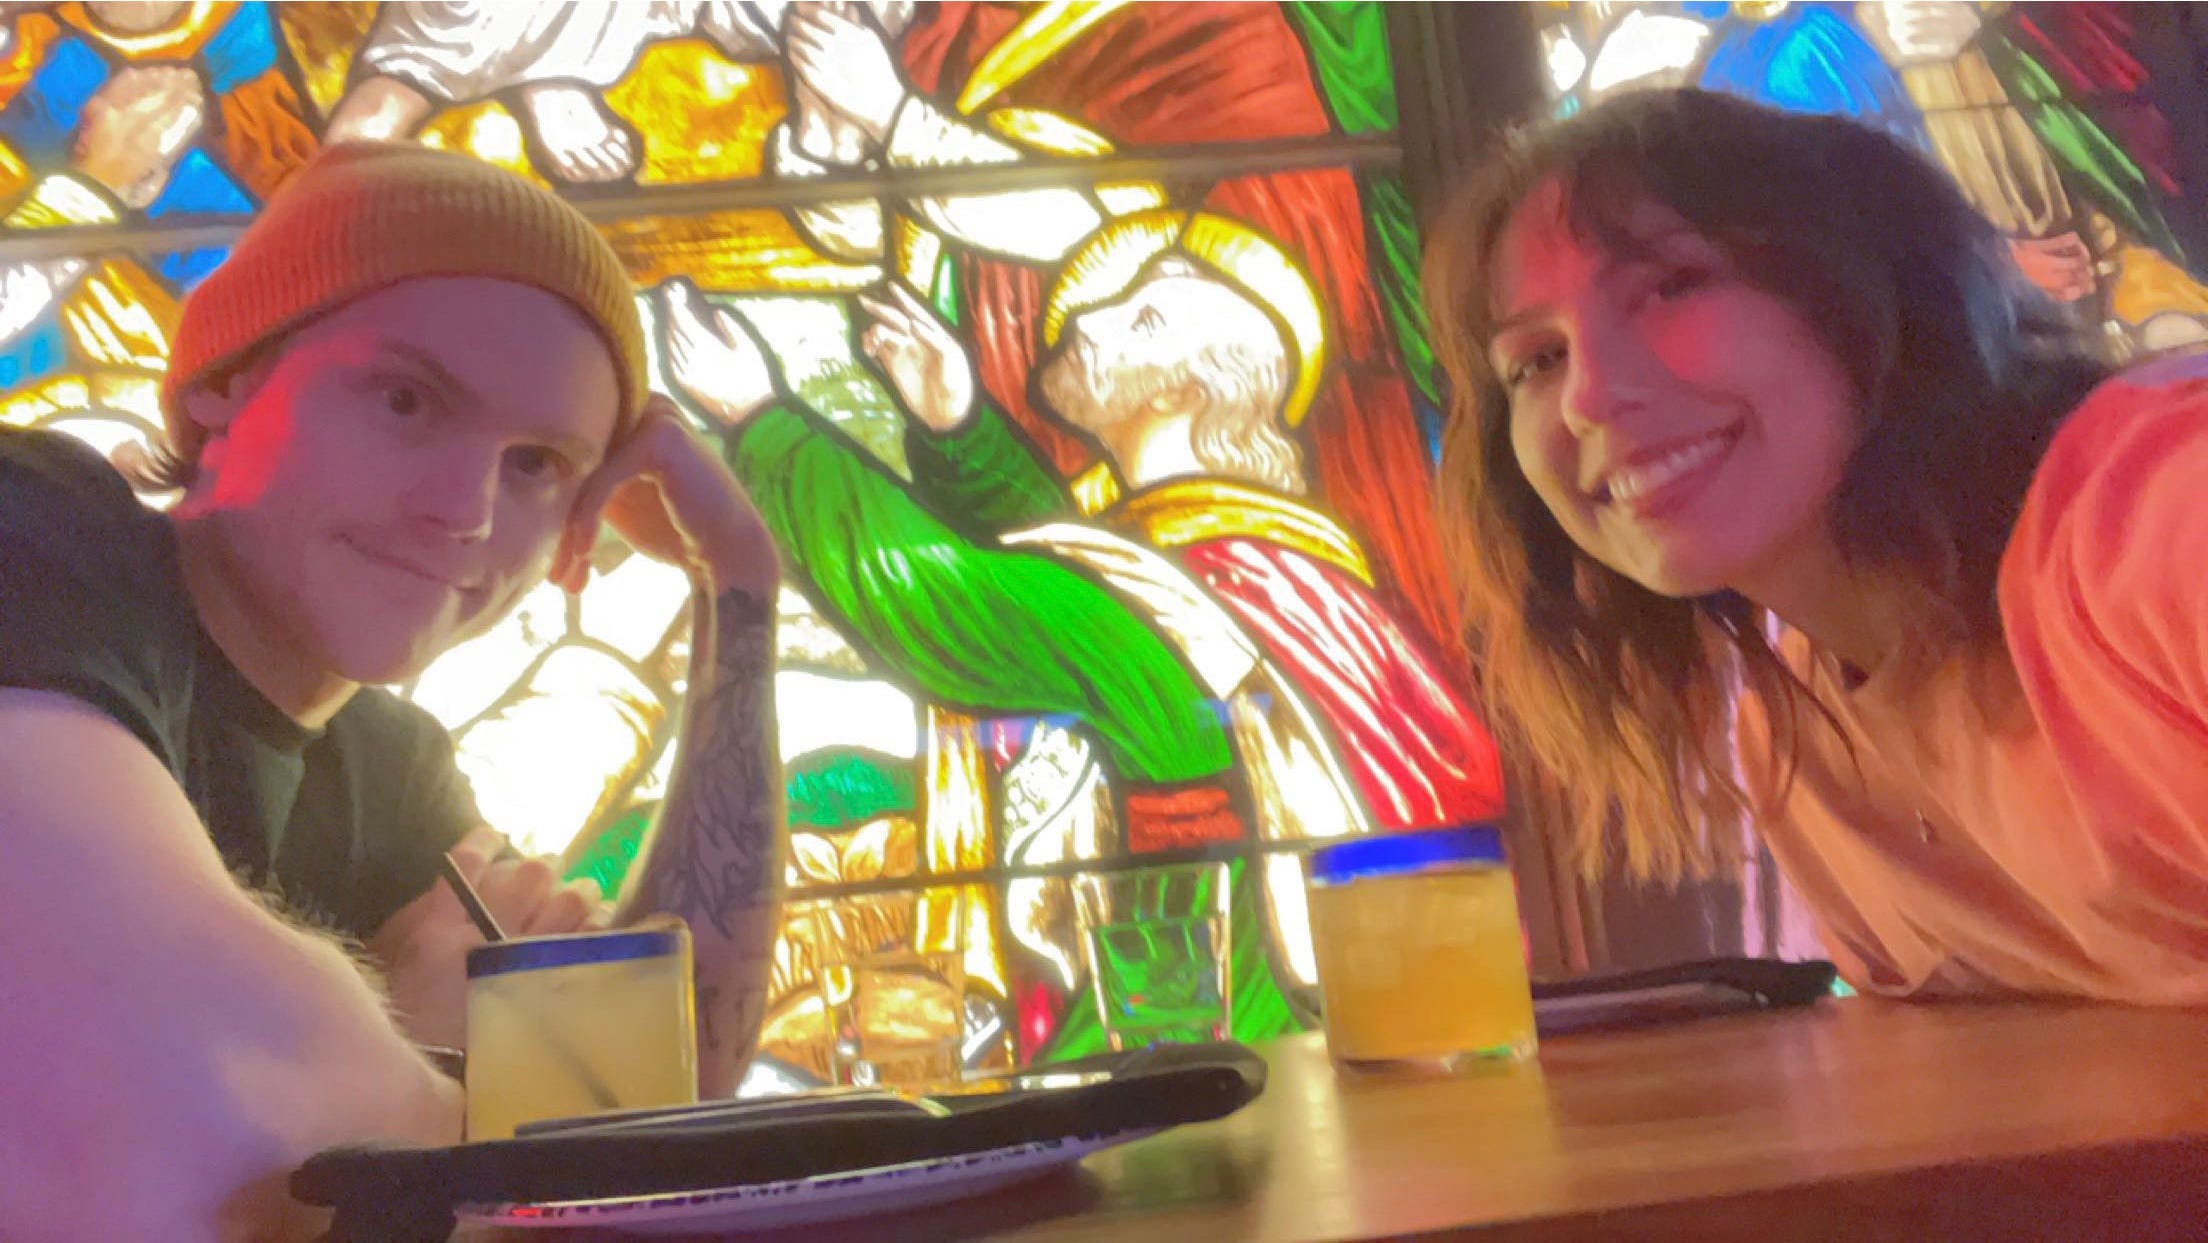 andrea valdez and brandon wells at a restaurant table taking a selfie